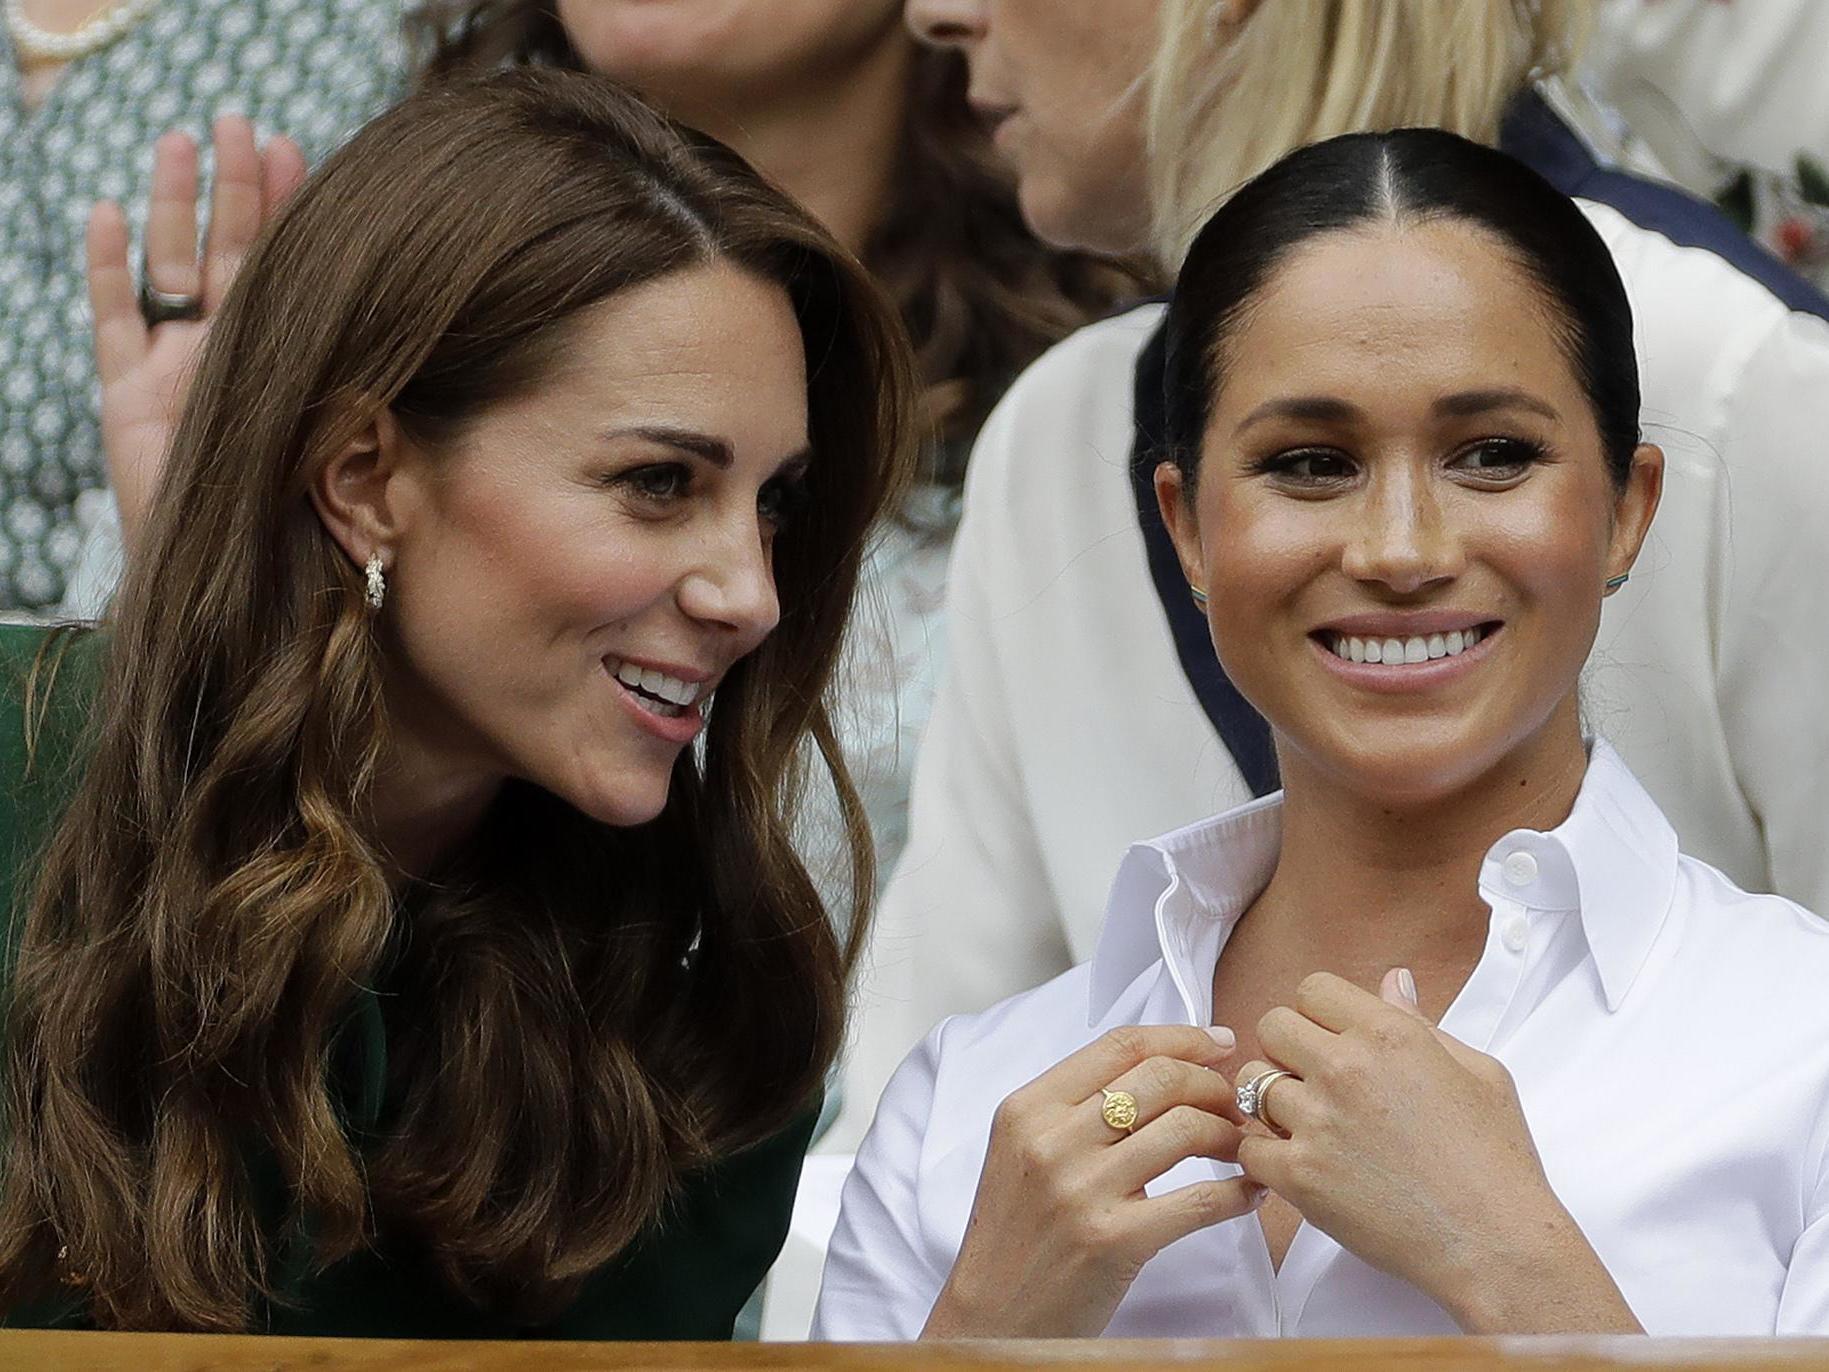 Kate, Duchess of Cambridge, left, and Meghan, Duchess of Sussex chat as they sit in the Royal Box on Centre Court to watch the women's singles final match between Serena Williams of the United States and Romania's Simona Halep on day twelve of the Wimbledon Tennis Championships in London.